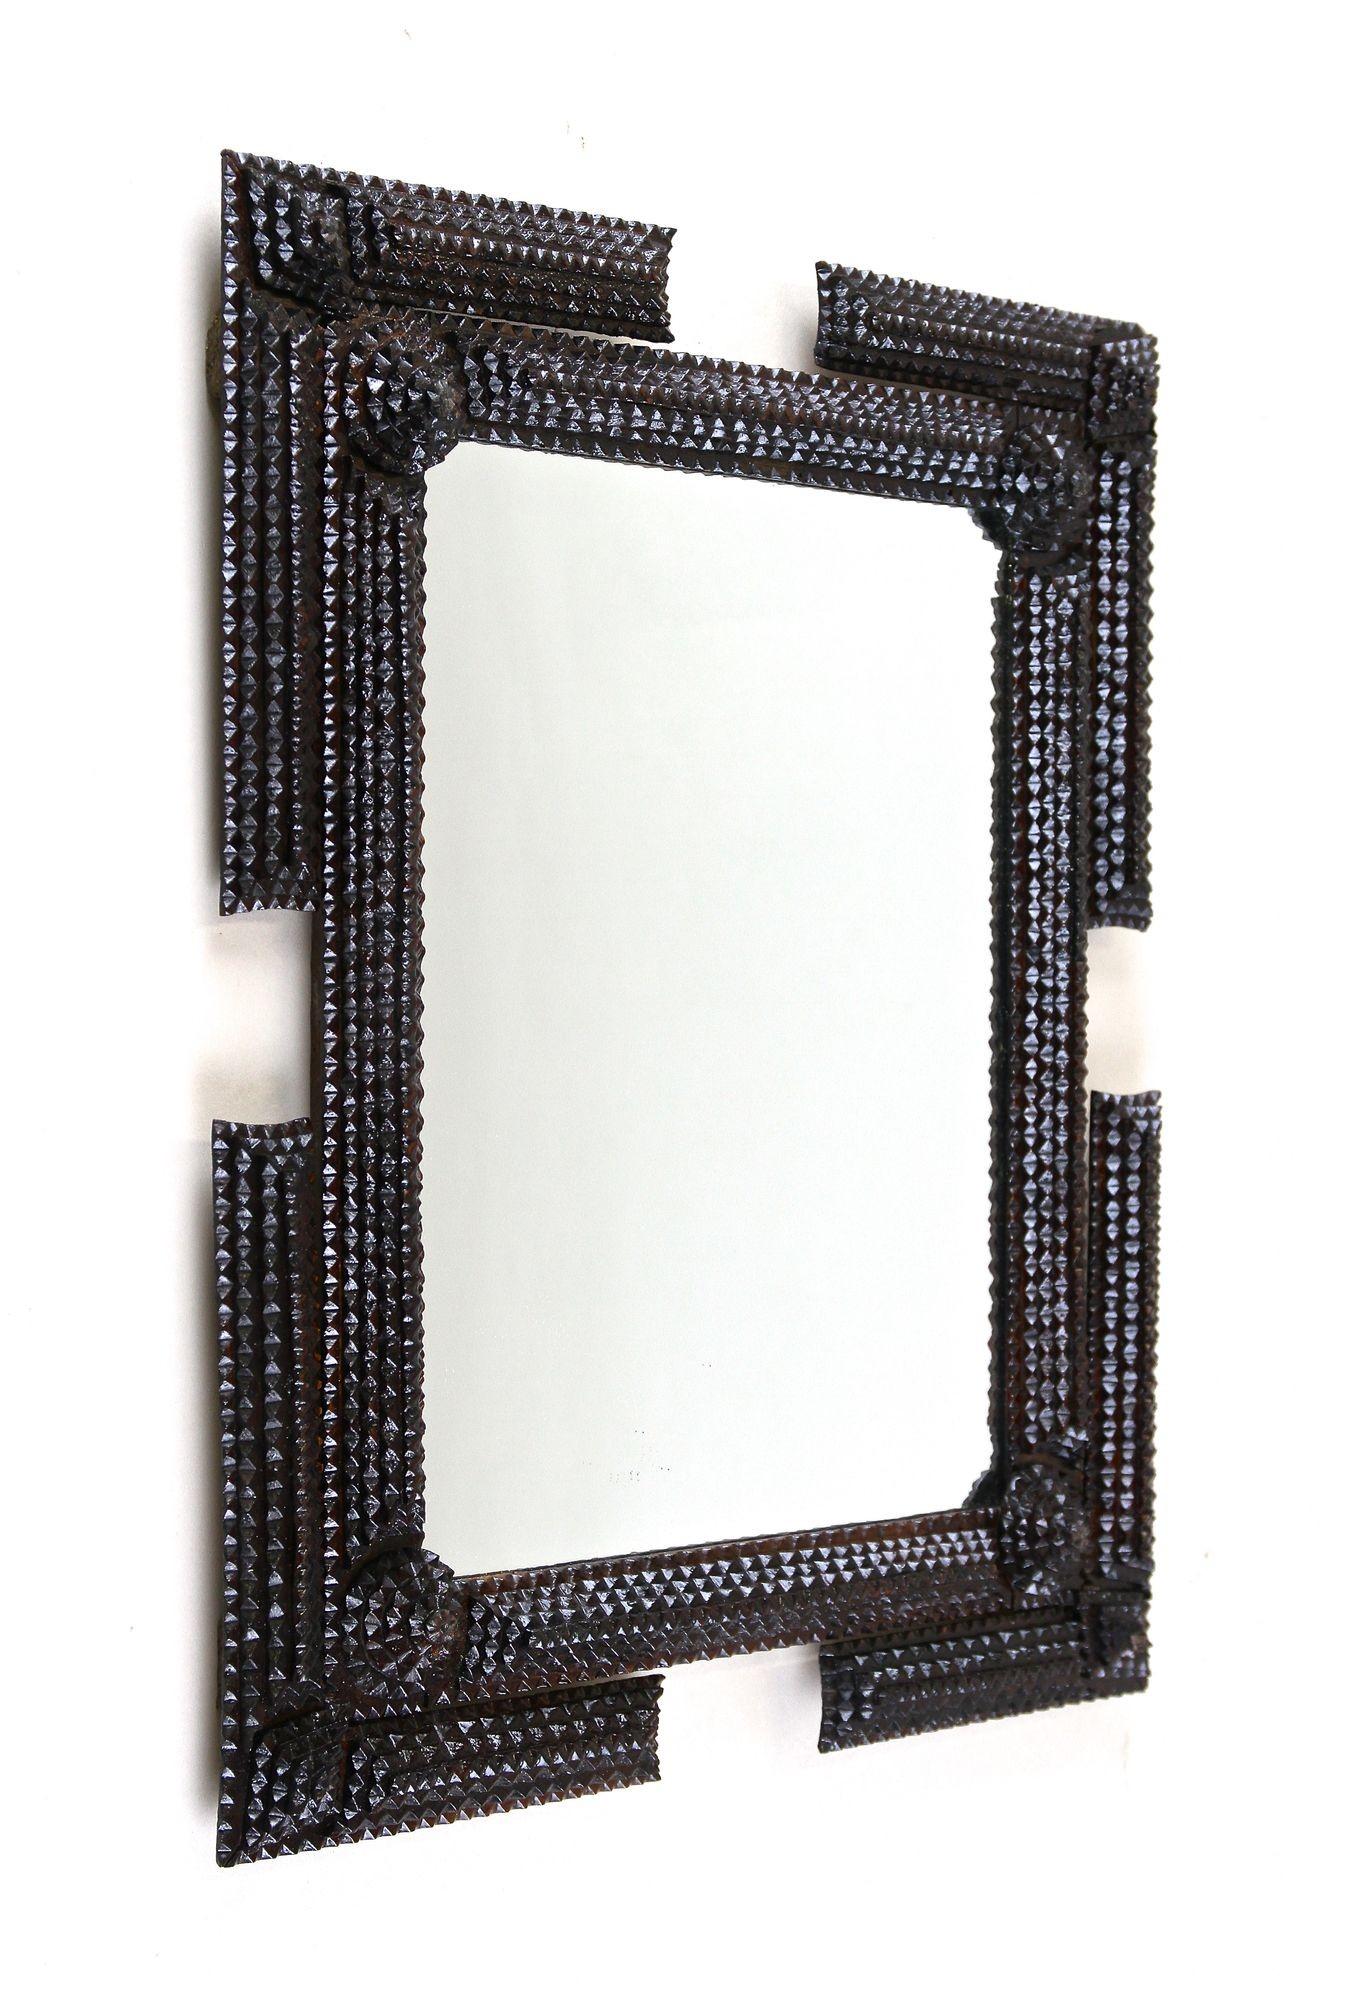 Extraordinary rustic Tramp Art wall mirror from the late 19th century period in Austria around 1870. This very elaborately hand carved mirror impresses with an exceptional designed frame which adorned by elaborately worked chip carvings. The